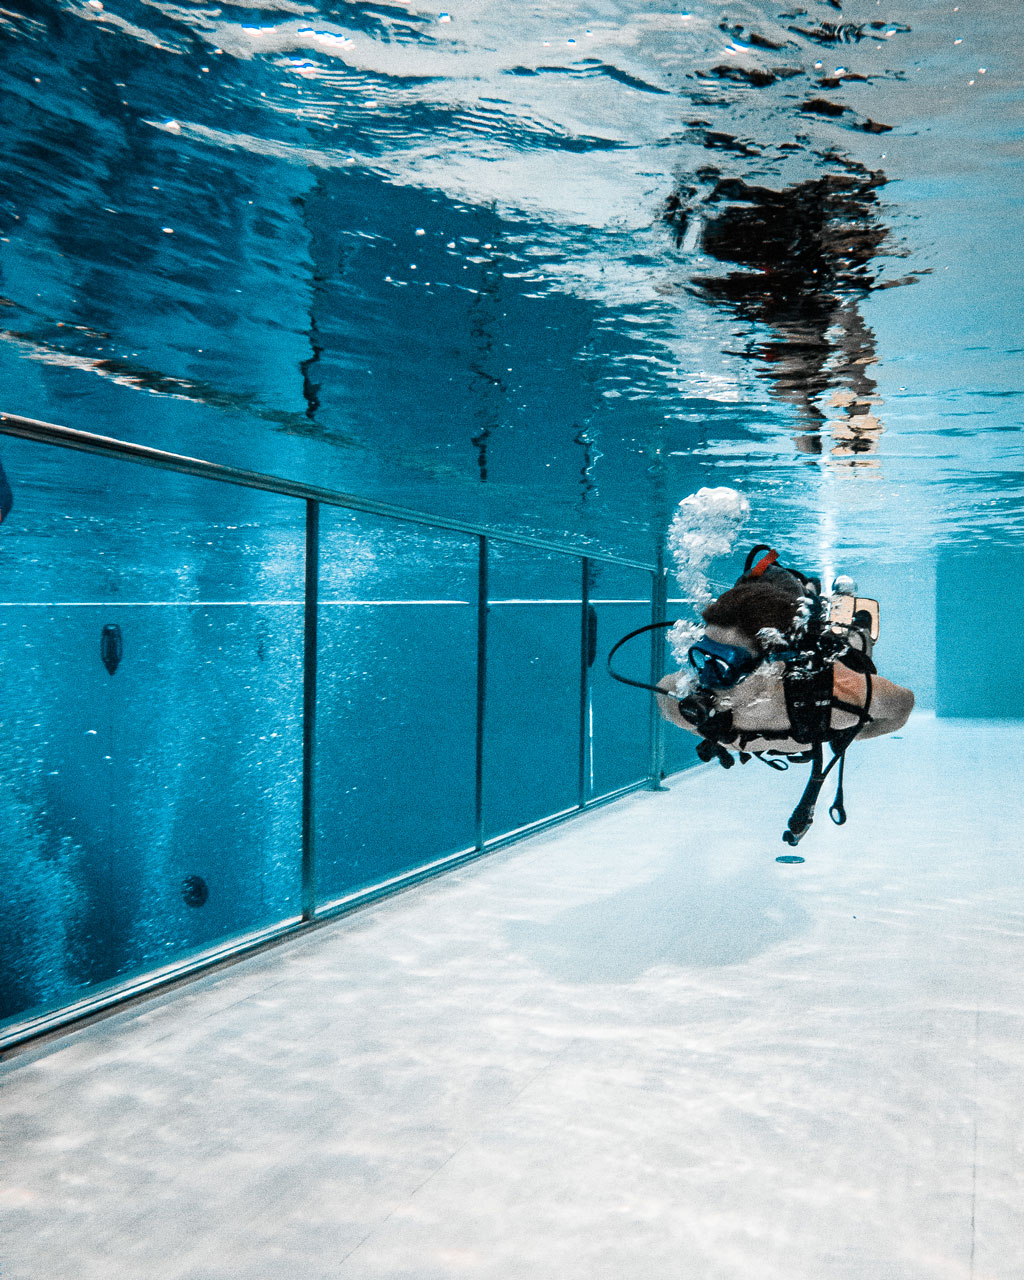 Dive while breathing underwater. Once you have become familiar with the scuba equipment in shallow water, you begin a gradual and slow descent to depth.